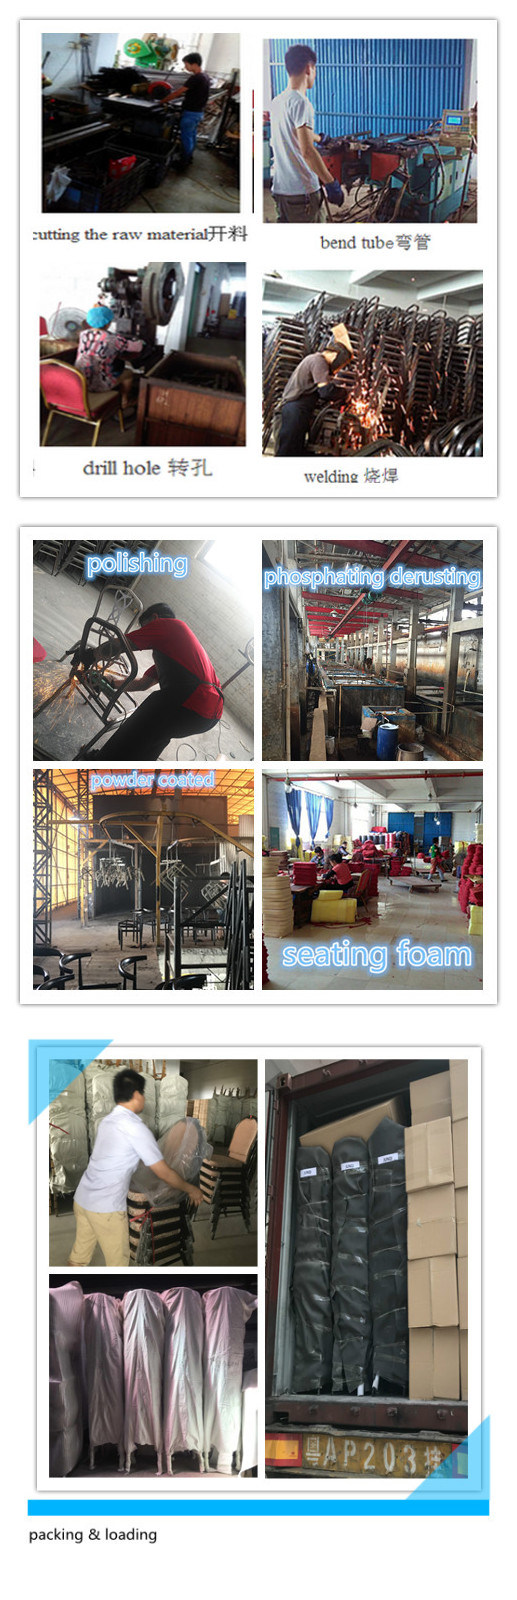 Industrial Dining Metal Iron Sheet Chair Frame Wholesale Stacking Chair